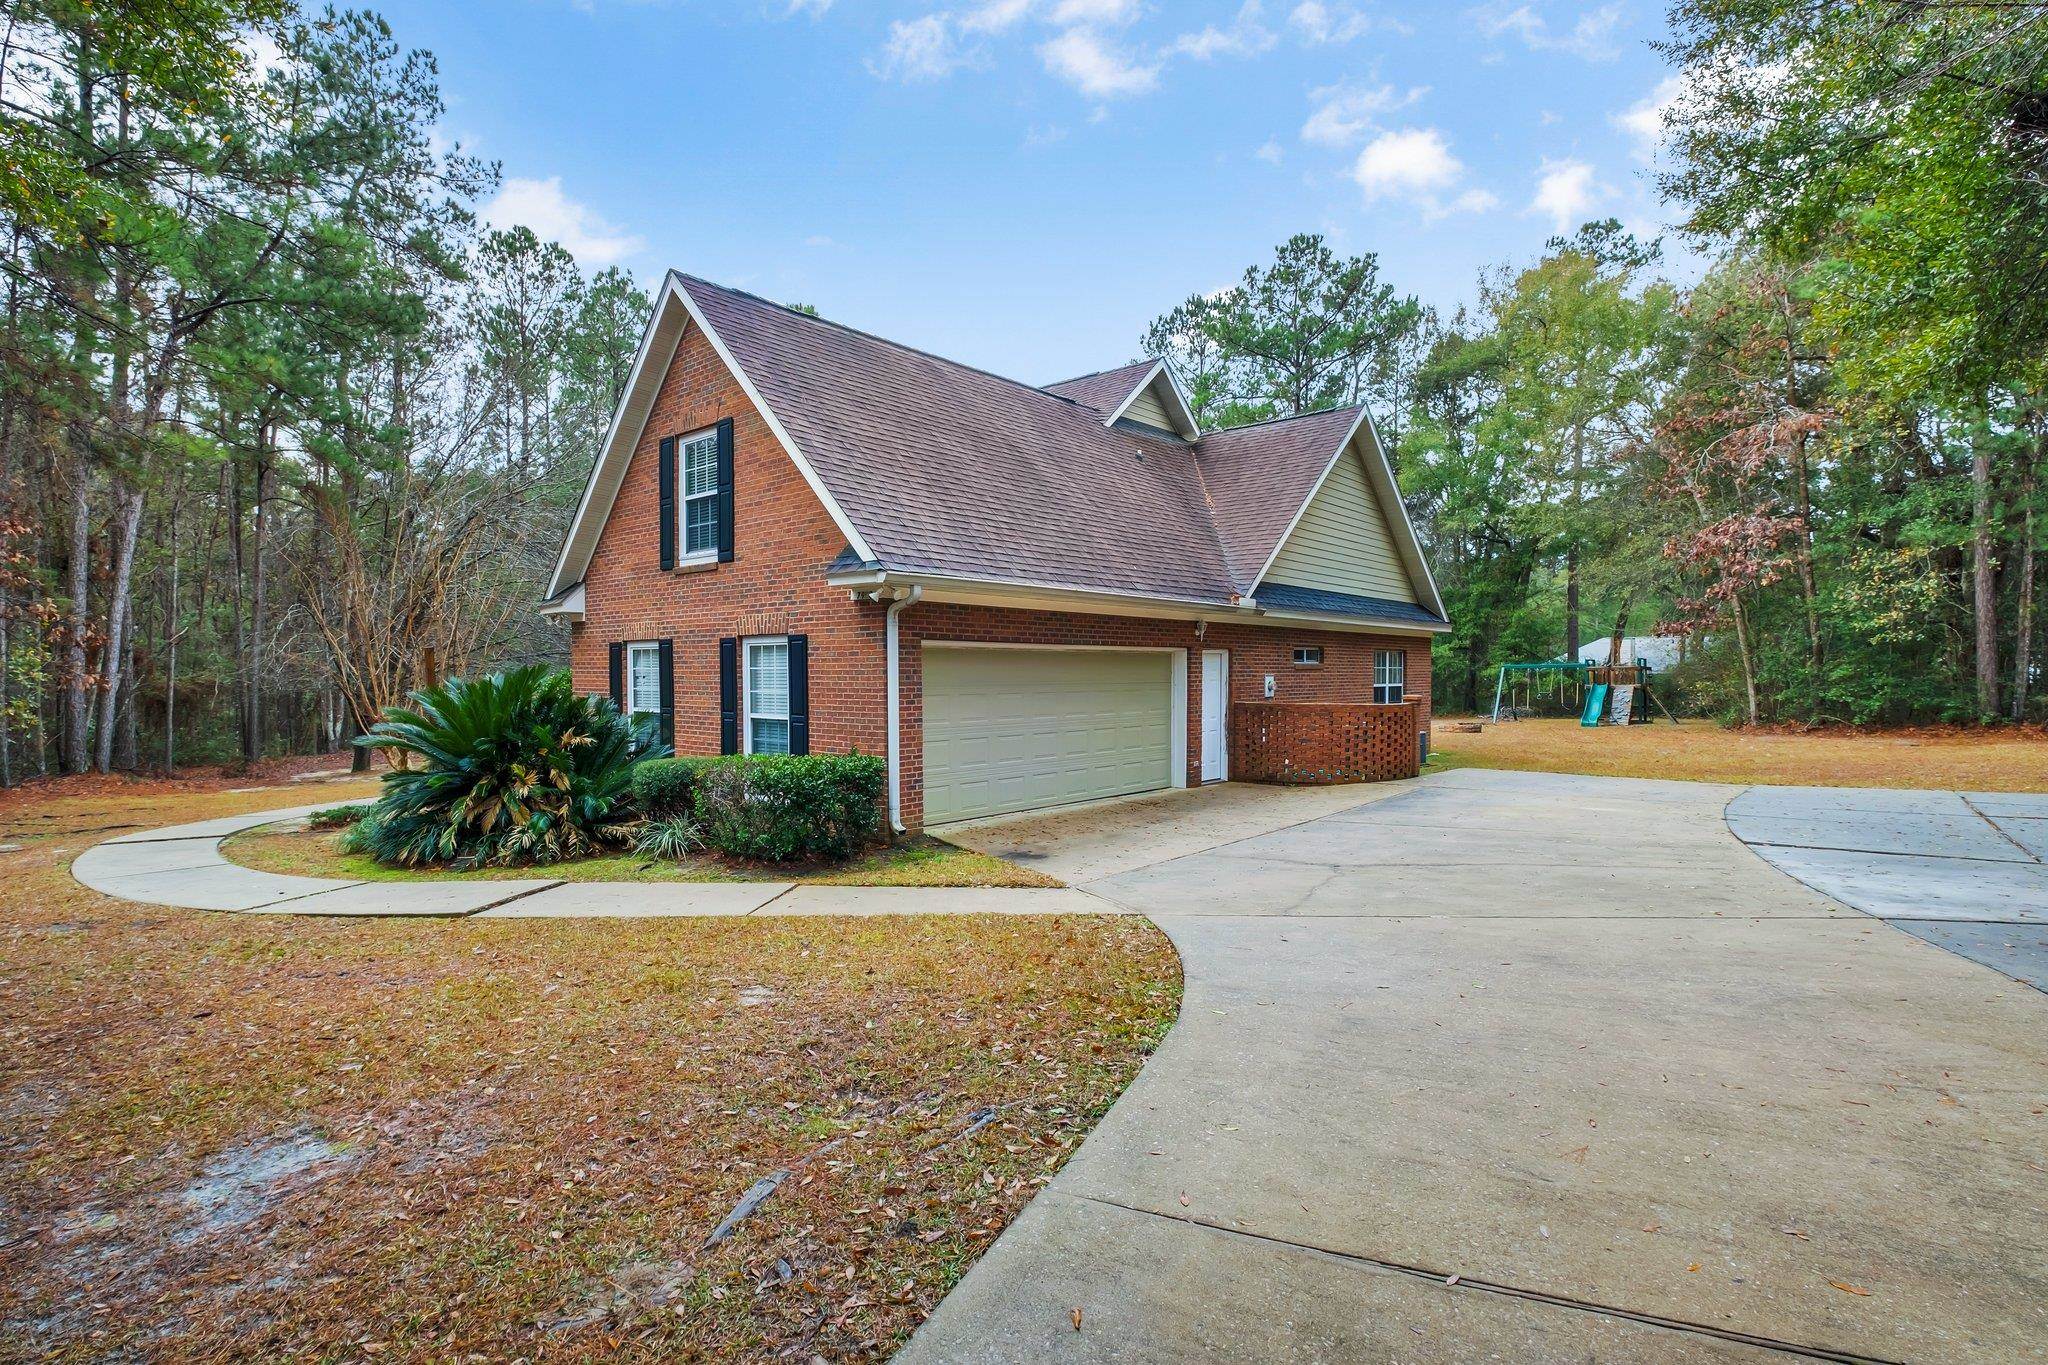 7903 McClure Drive,TALLAHASSEE,Florida 32312,4 Bedrooms Bedrooms,3 BathroomsBathrooms,Detached single family,7903 McClure Drive,367922